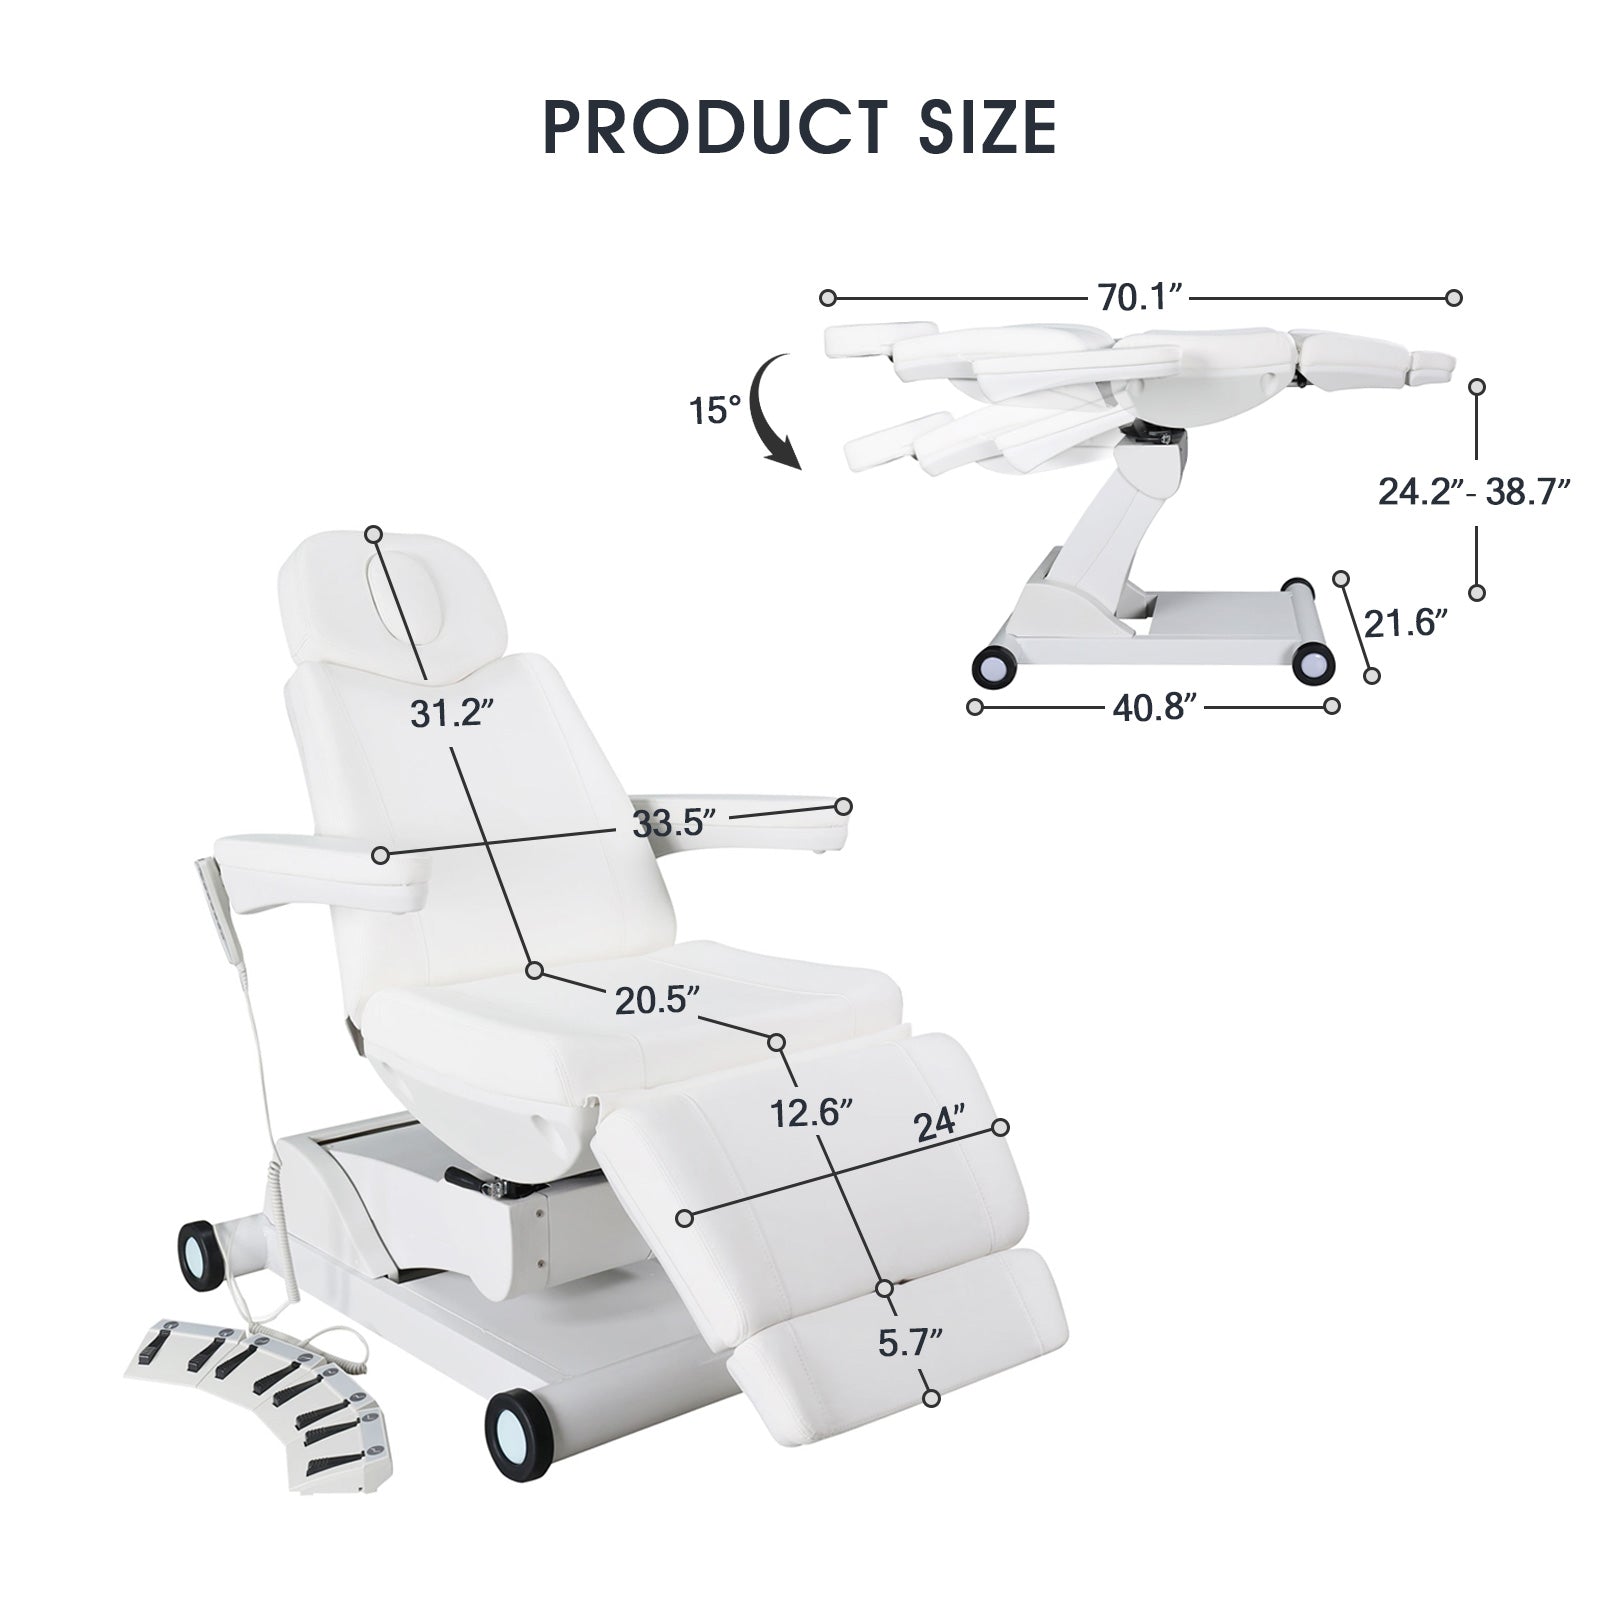 #2906 4 Motors Aesthetic Chair Dual Control Full Electrical Medical Facial Beds for Esthetician Beauty Bed Foldable Leg Cushion Podiatry Doctors Chair